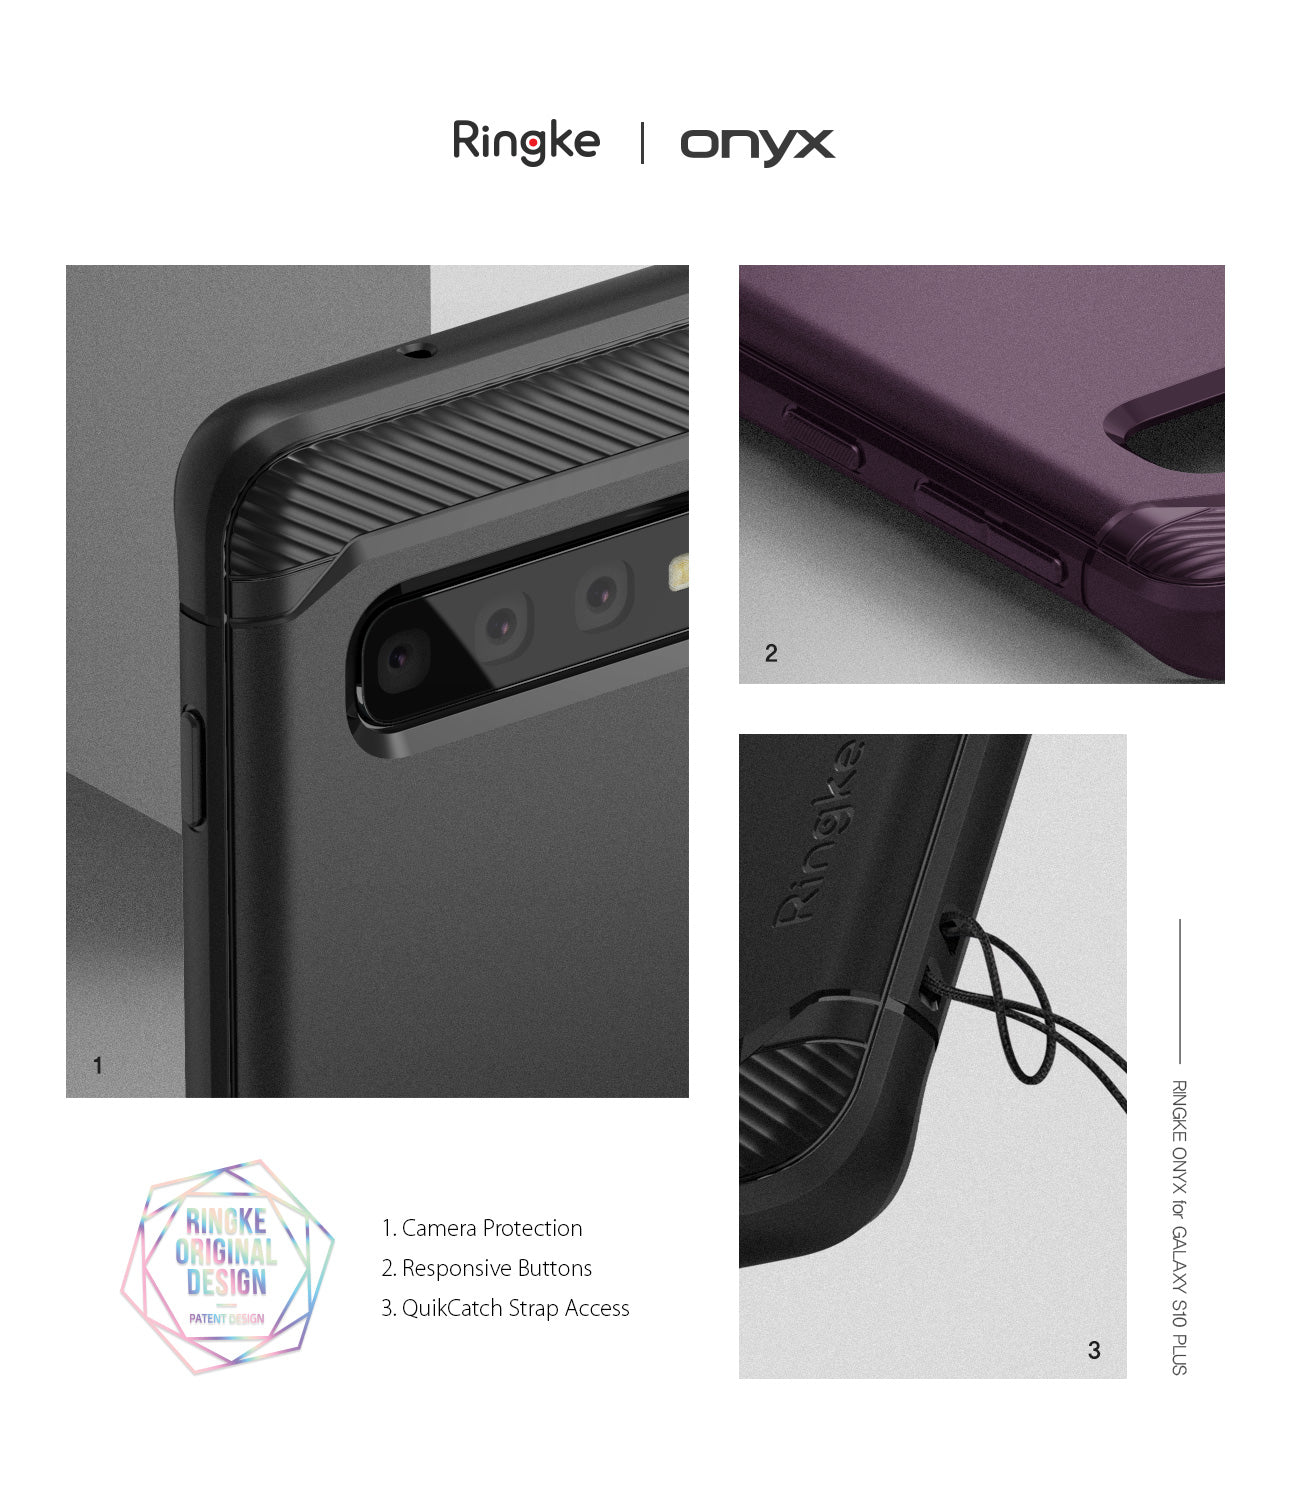 Galaxy S10 Plus Case | Onyx - Camera Protection. Responsive Buttons. QuikCatch Strap Access